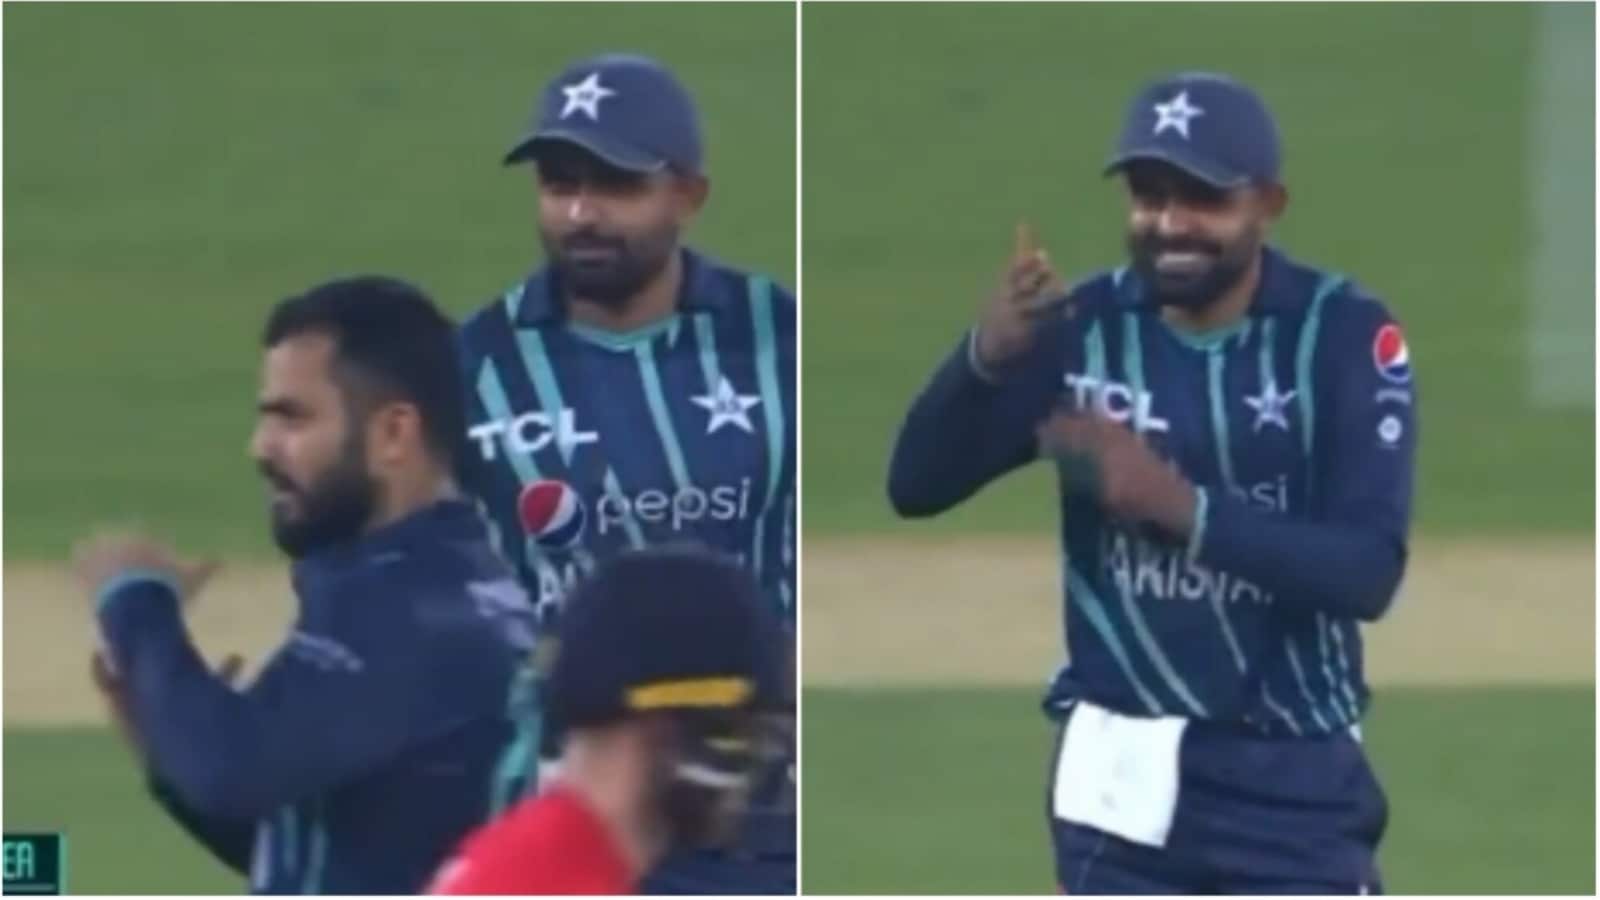 watch-mohammad-nawaz-signals-for-drs-towards-umpire-then-realises-his-mistake-babar-azam-s-reaction-is-absolute-gold